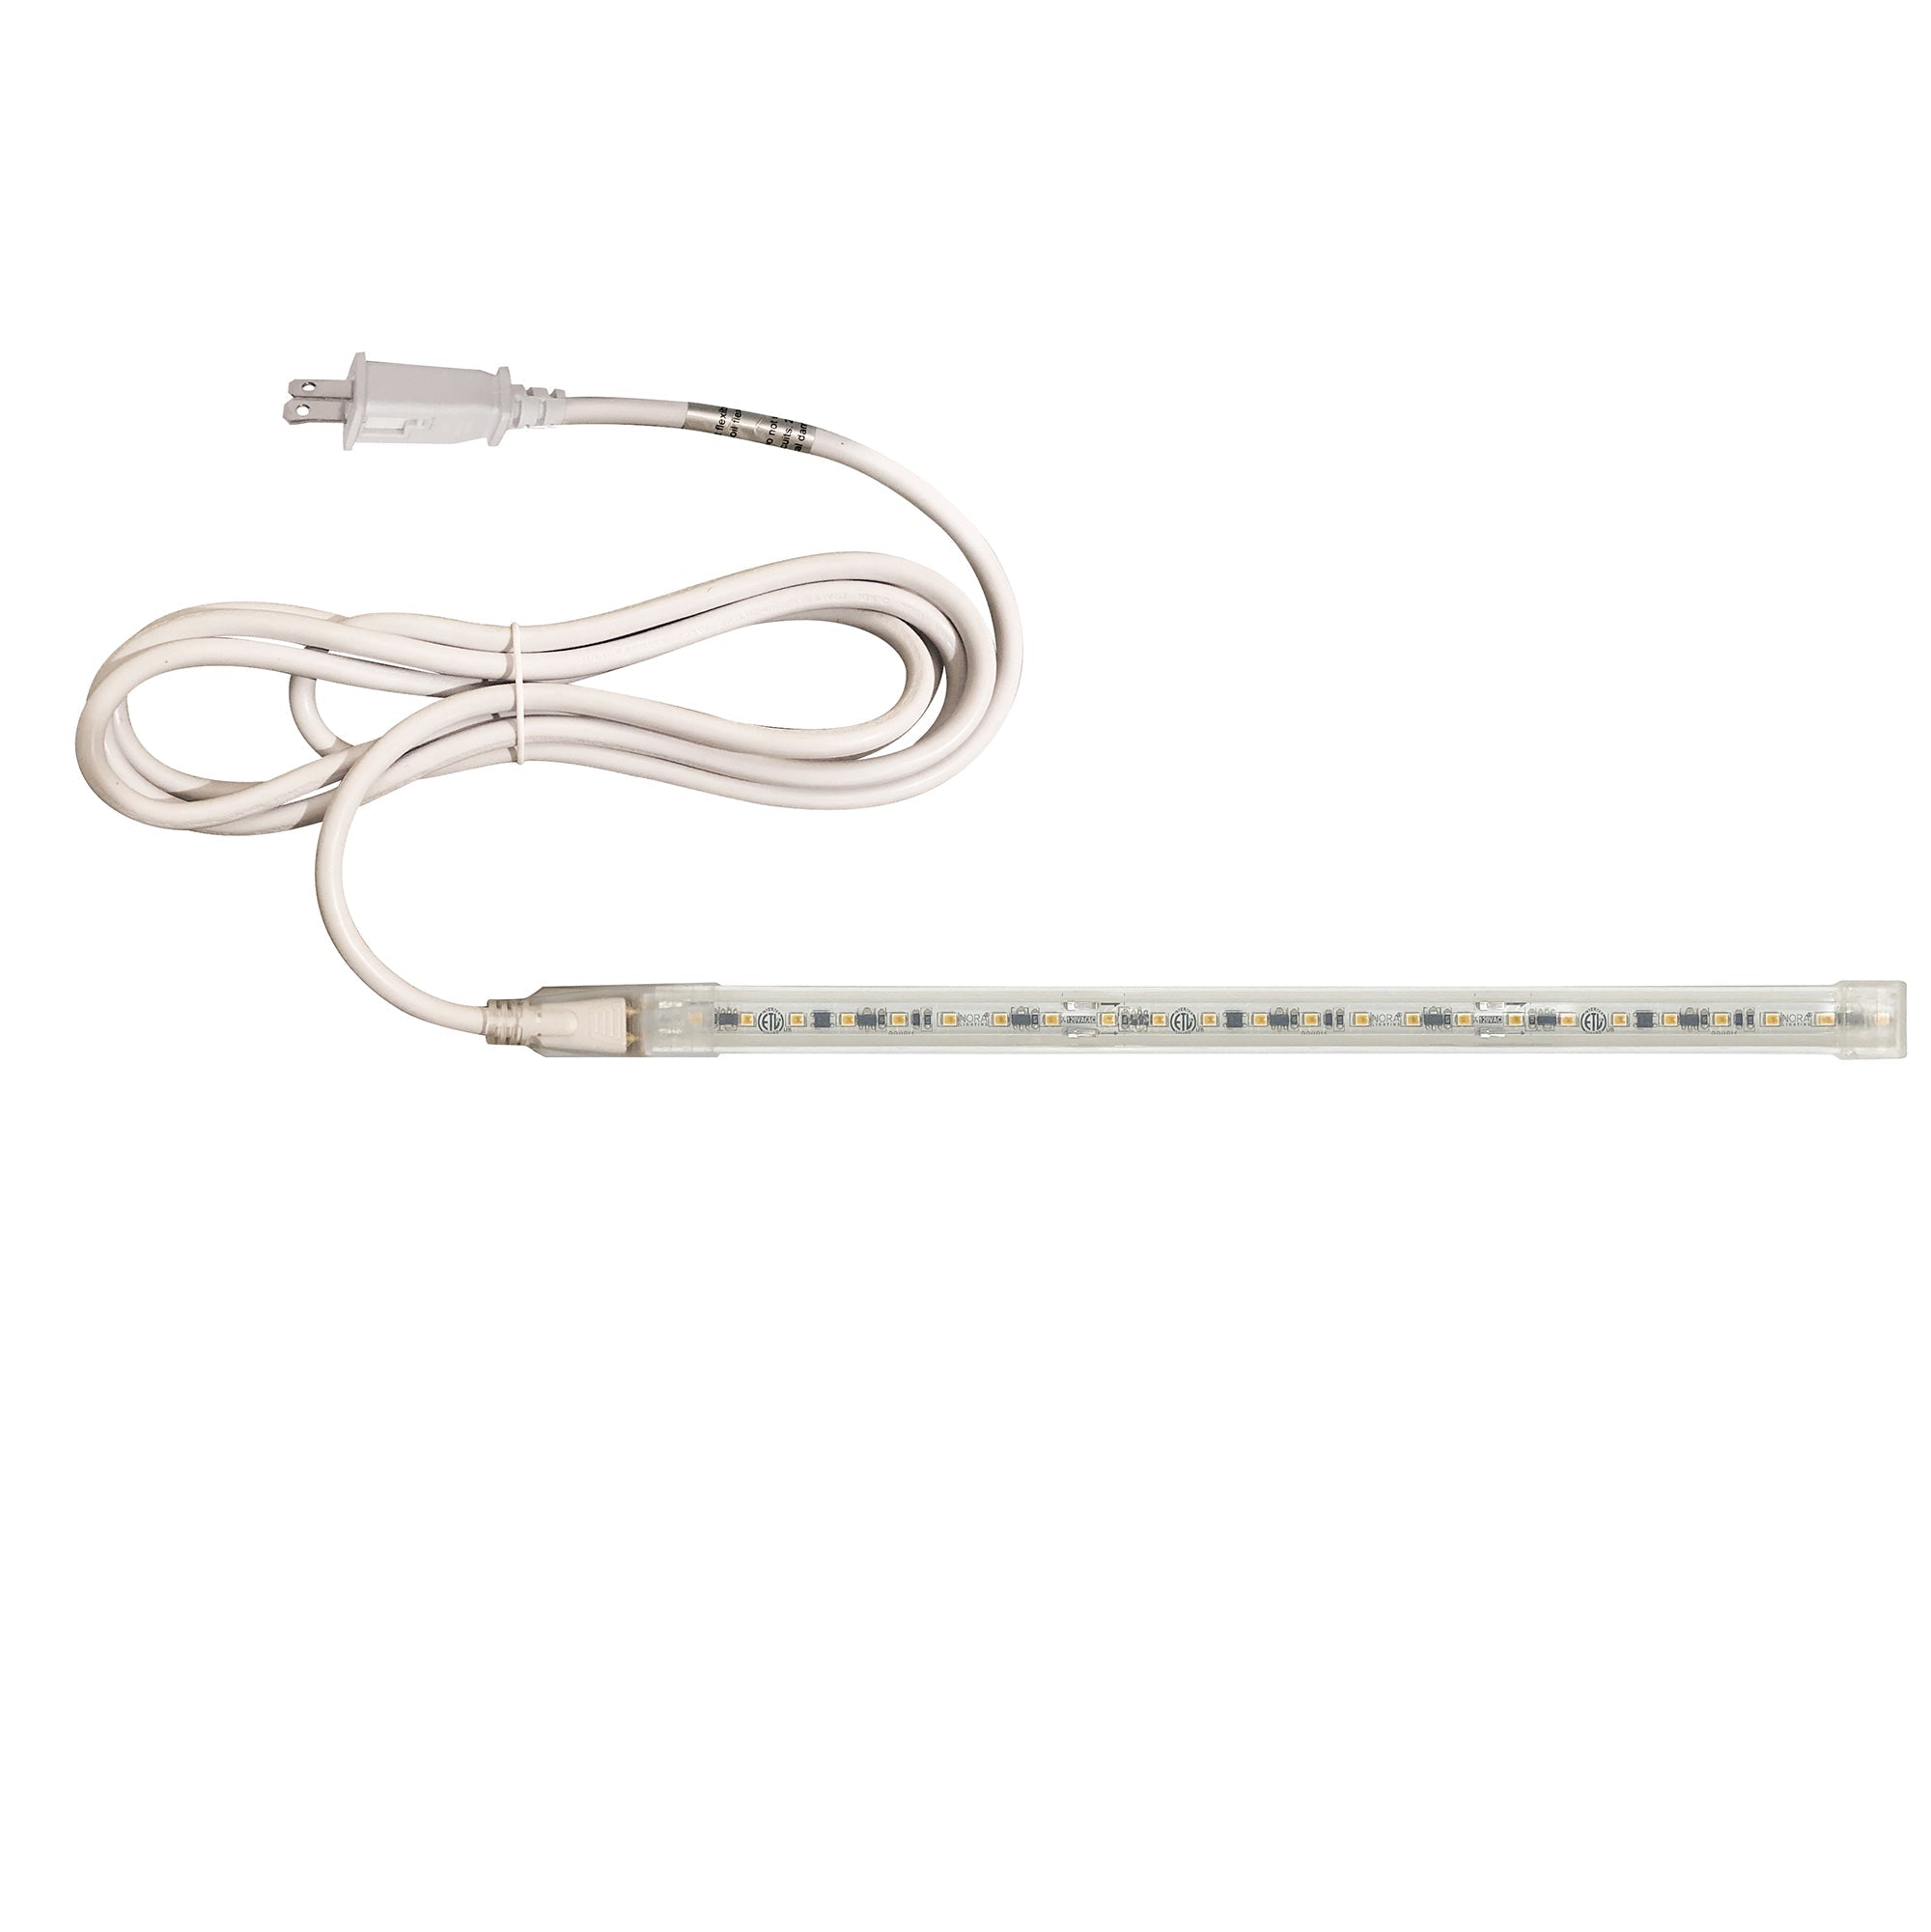 Nora Lighting NUTP13-W86-12-930/CP - Accent / Undercabinet - Custom Cut 86-ft 120V Continuous LED Tape Light, 330lm / 3.6W per foot, 3000K, w/ Mounting Clips and 8' Cord & Plug